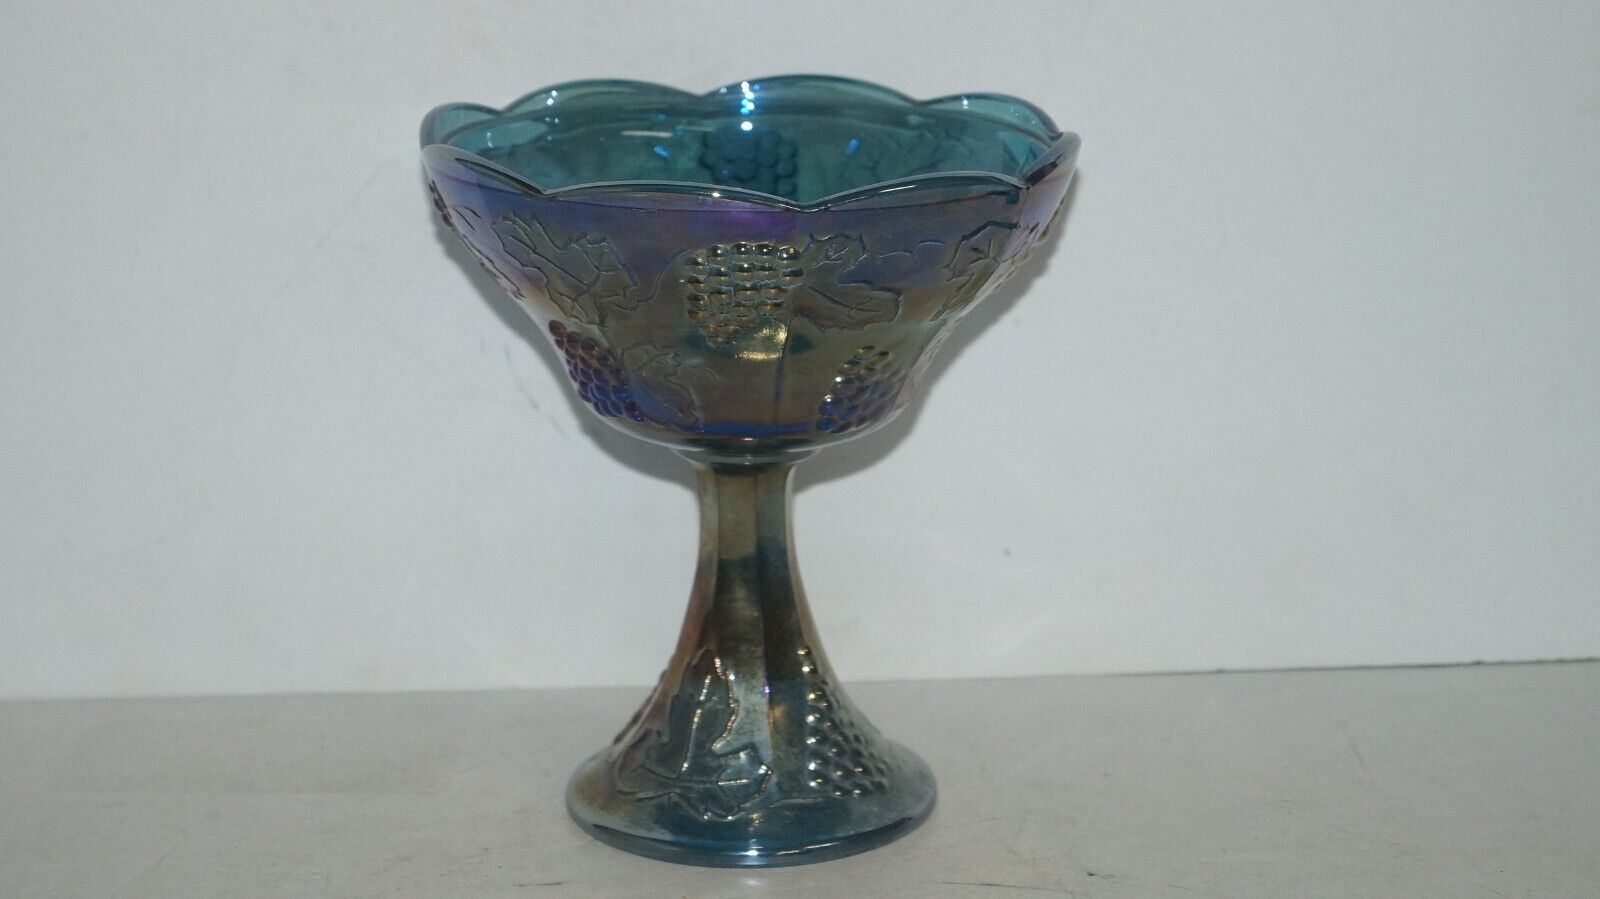 Indiana Glass Blue Carnival Harvest Grape Pedestal Candy Compote Dish Bowl